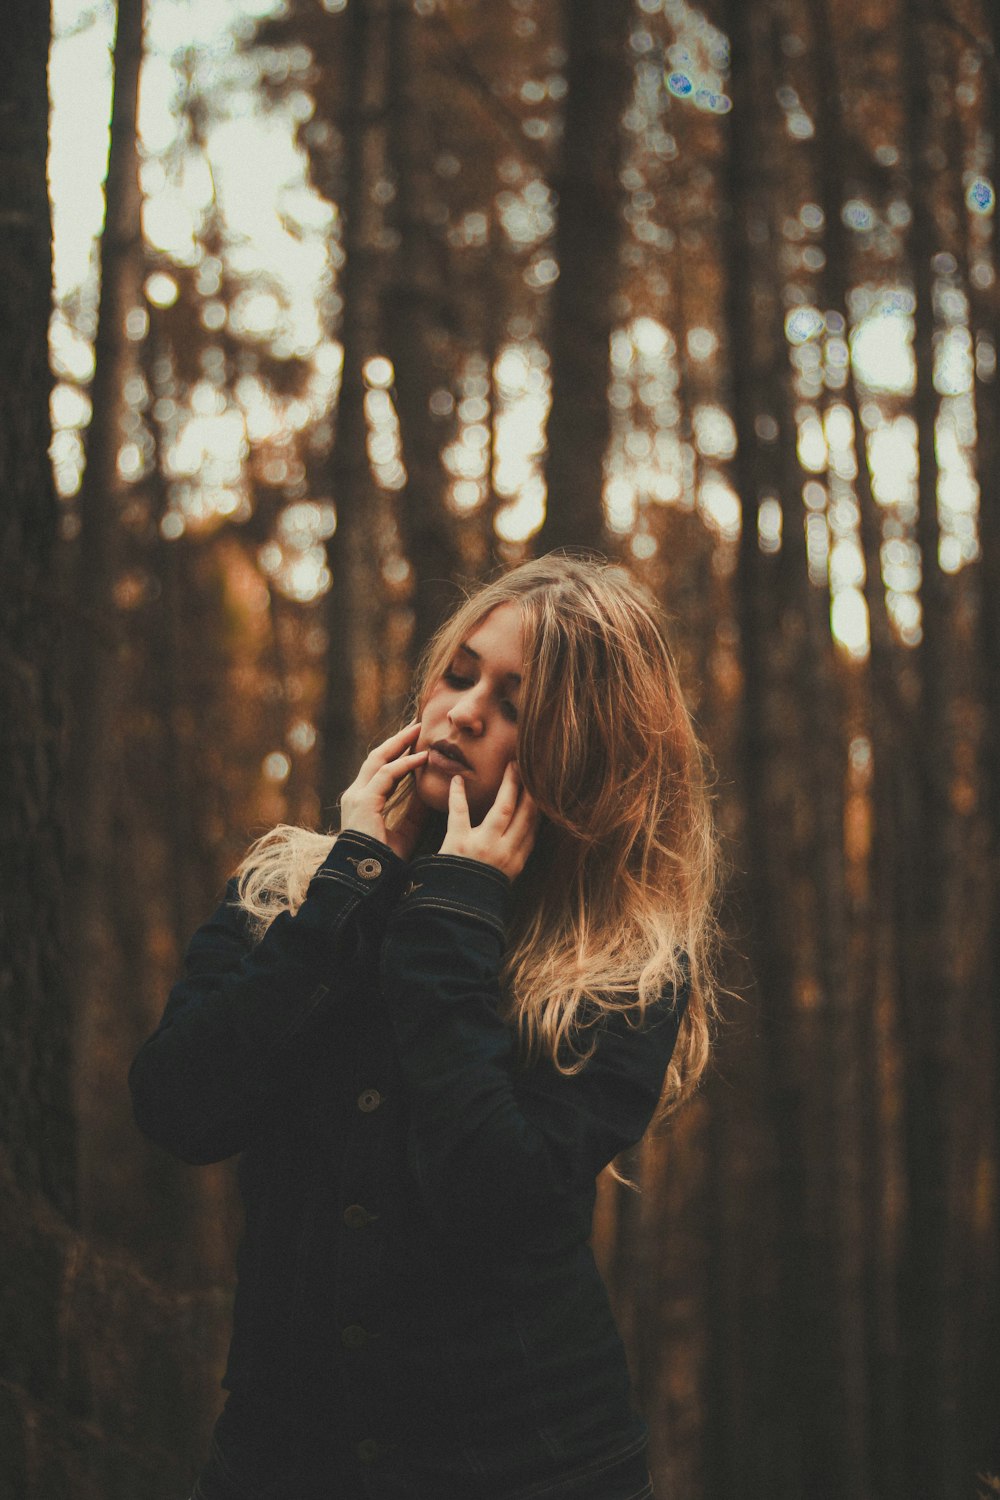 portrait photography of woman wearing black coat surrounded by forest trees during daytime